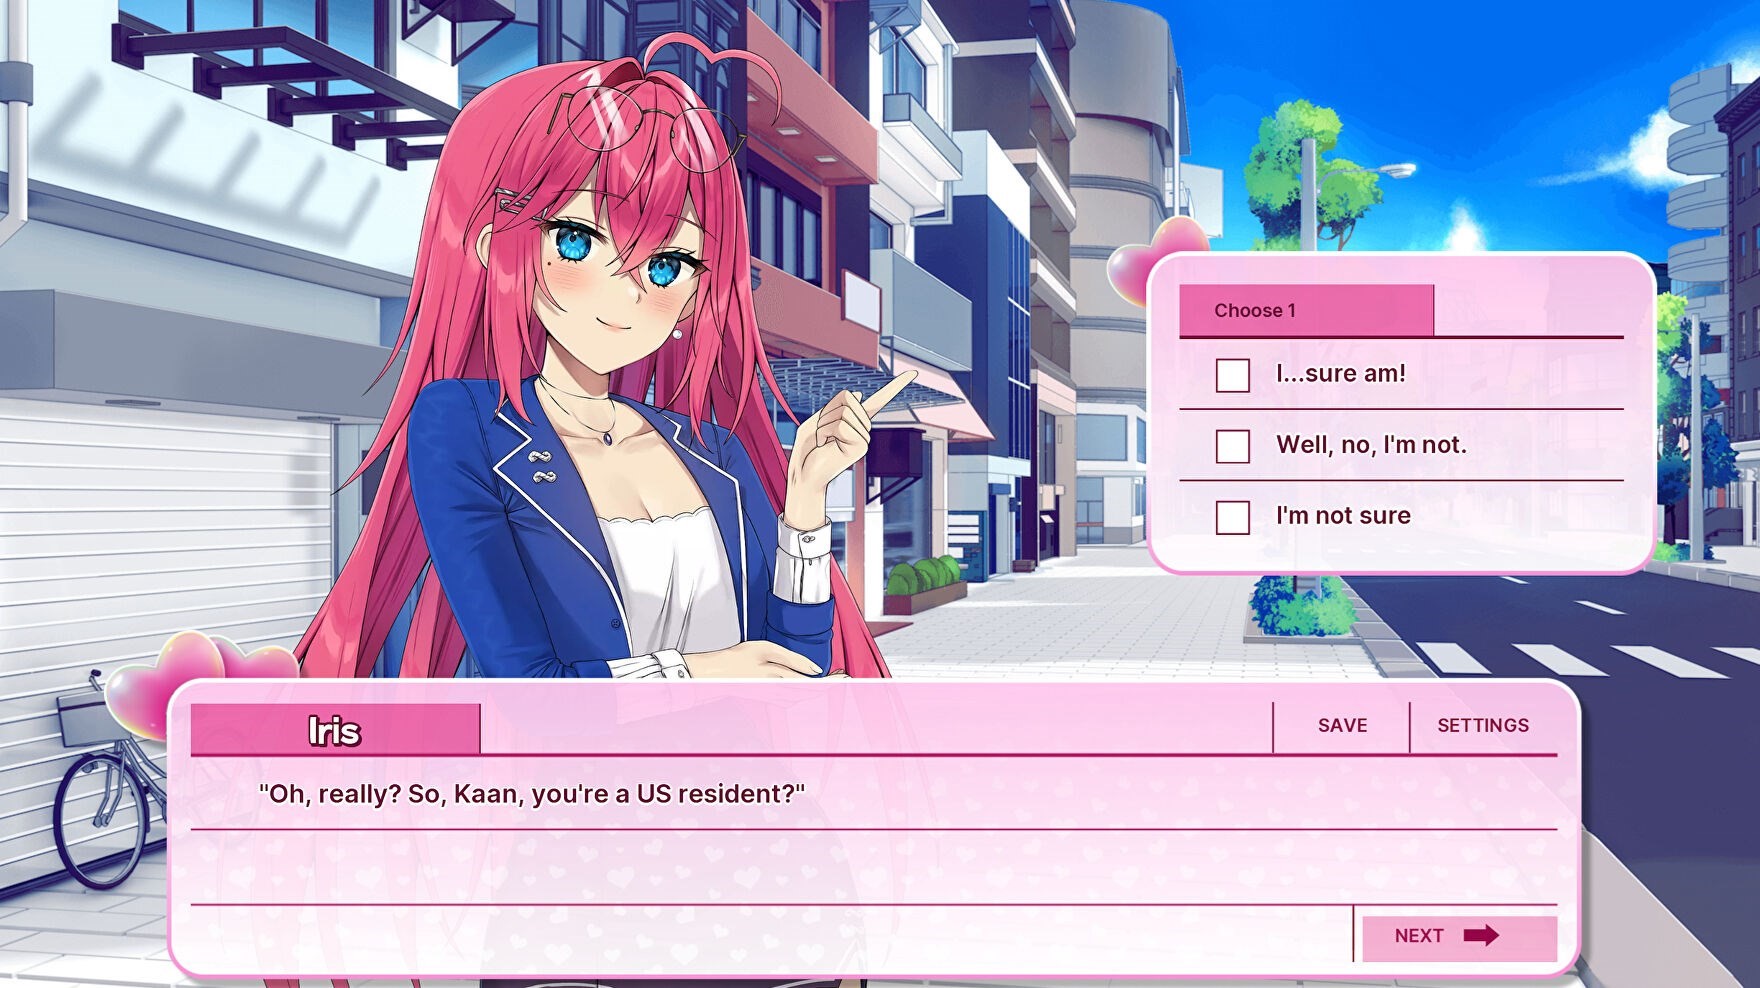 Tax Heaven 3000 is an anime dating sim that helps you file taxes - Polygon